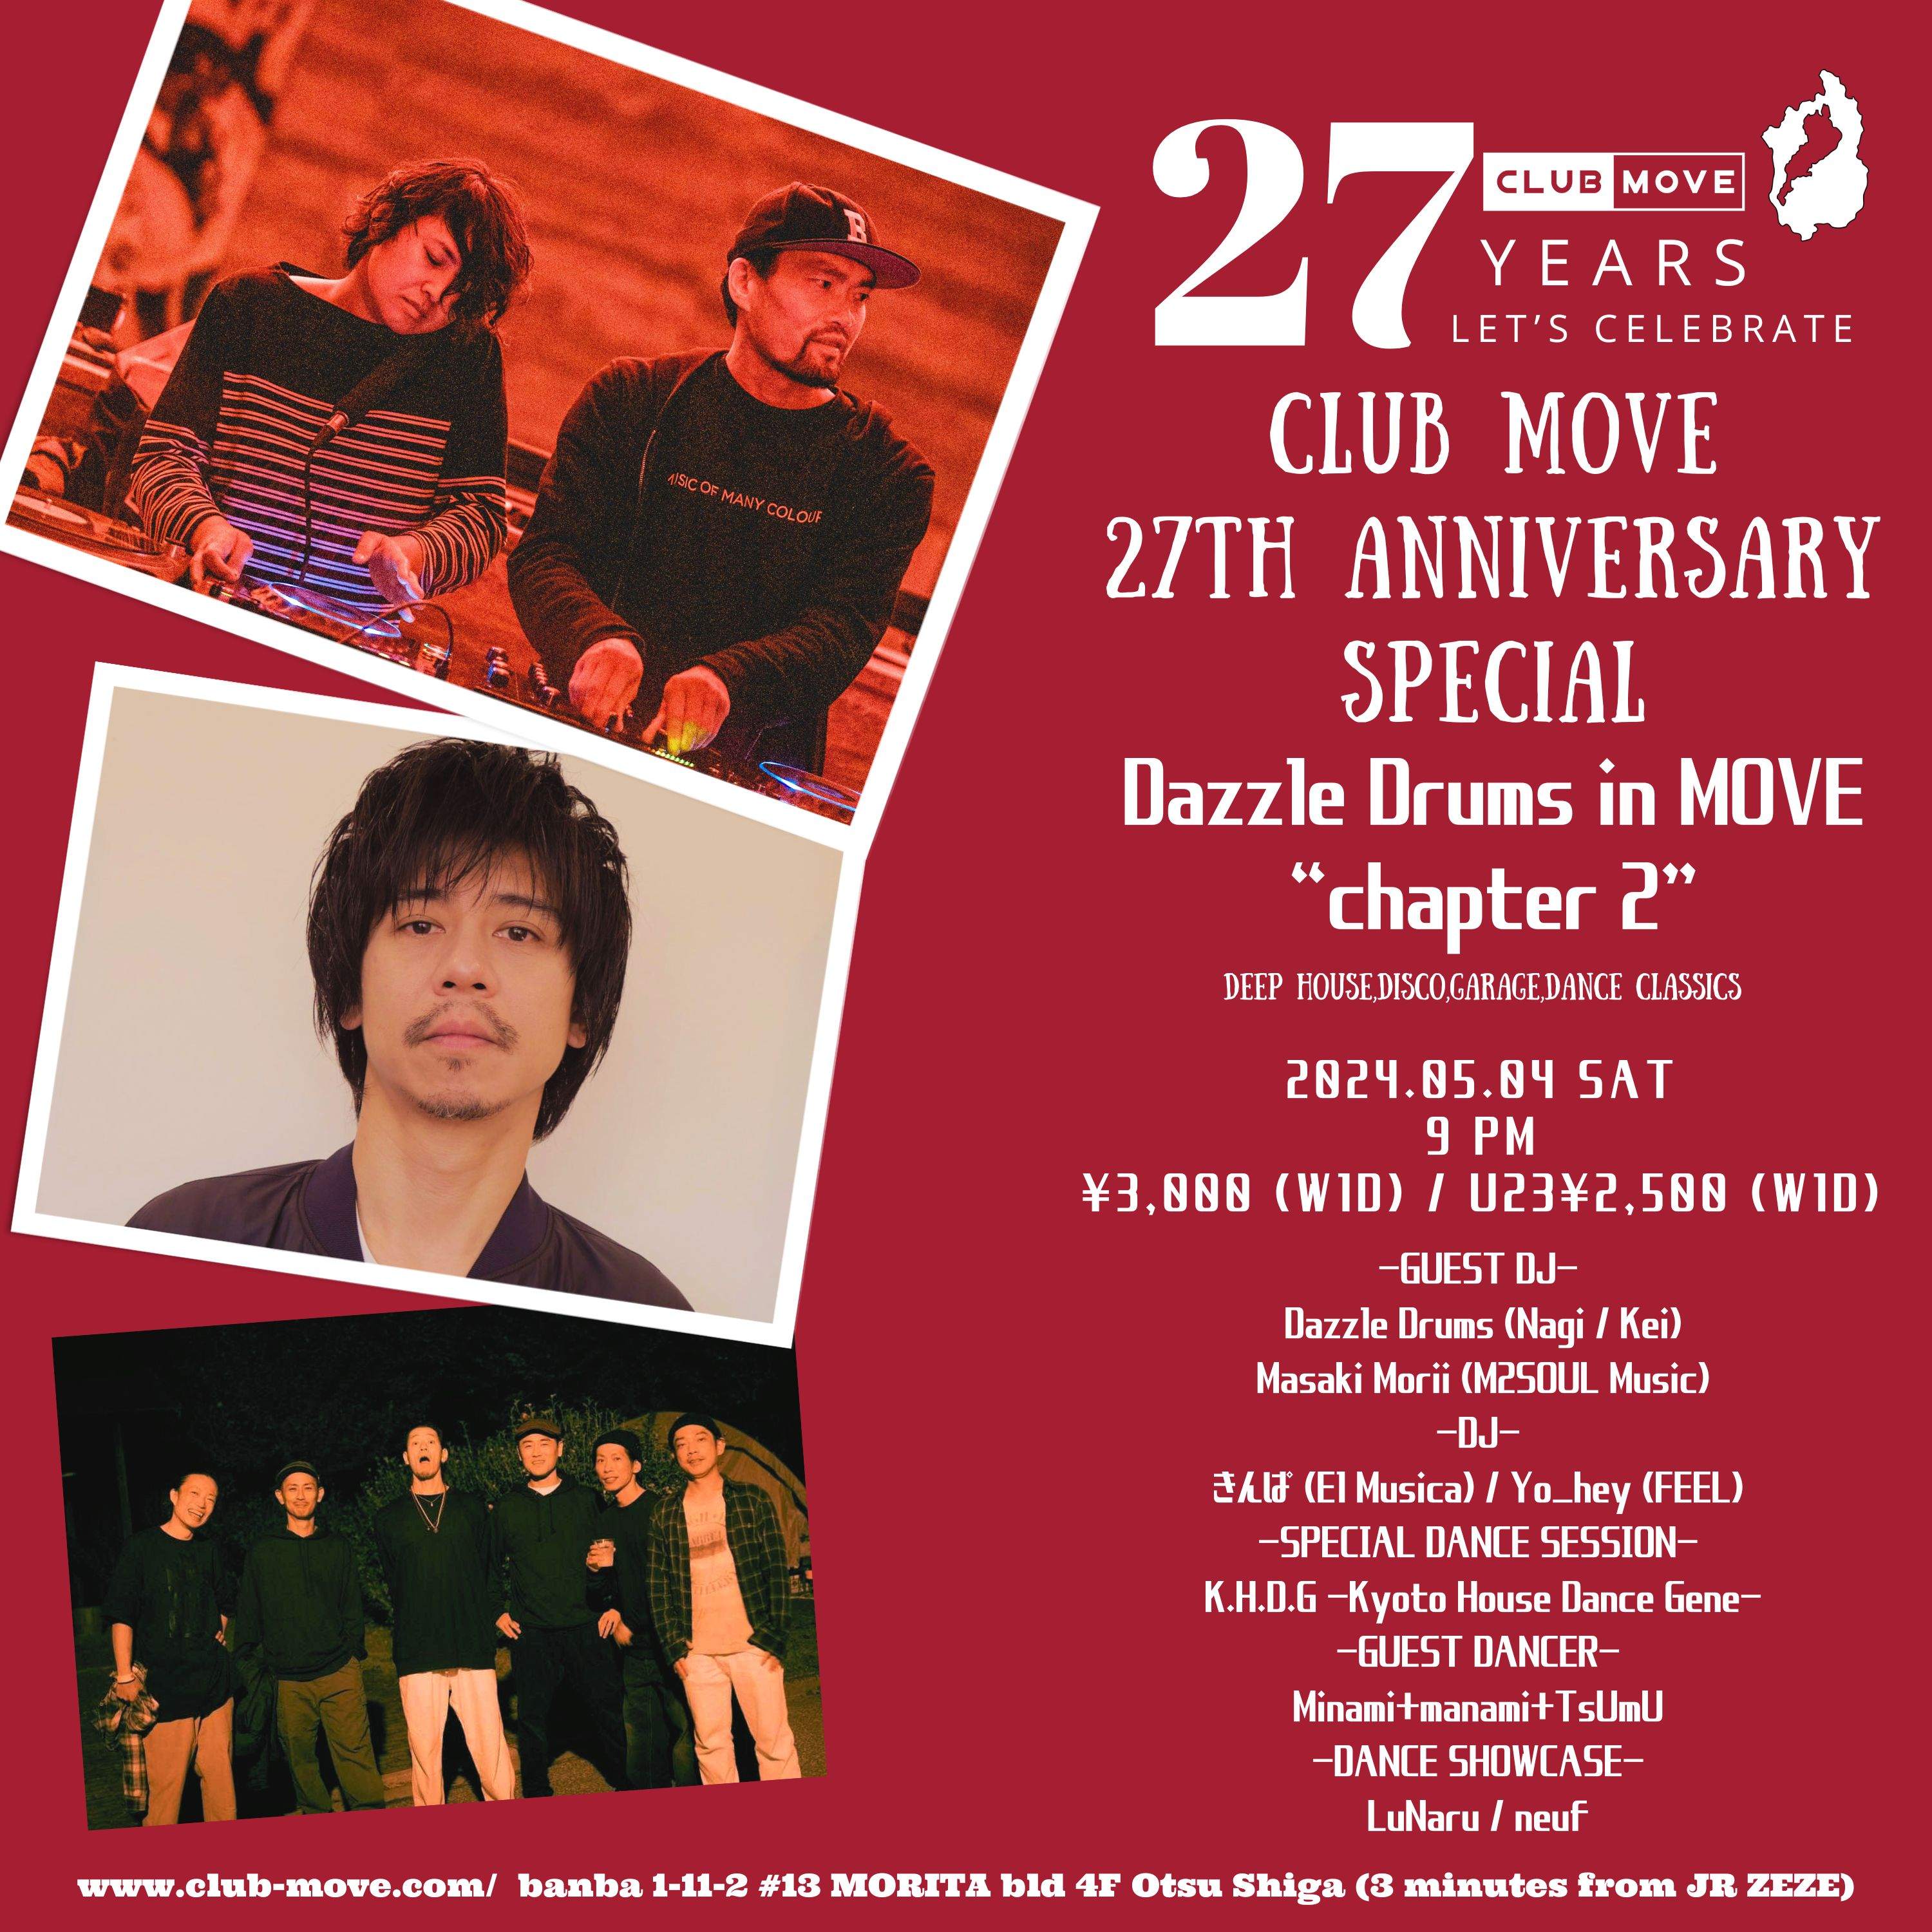 ～CLUB MOVE 27th Anniversary Special～ Dazzle Drums in MOVE -chapter 2- - フライヤー表